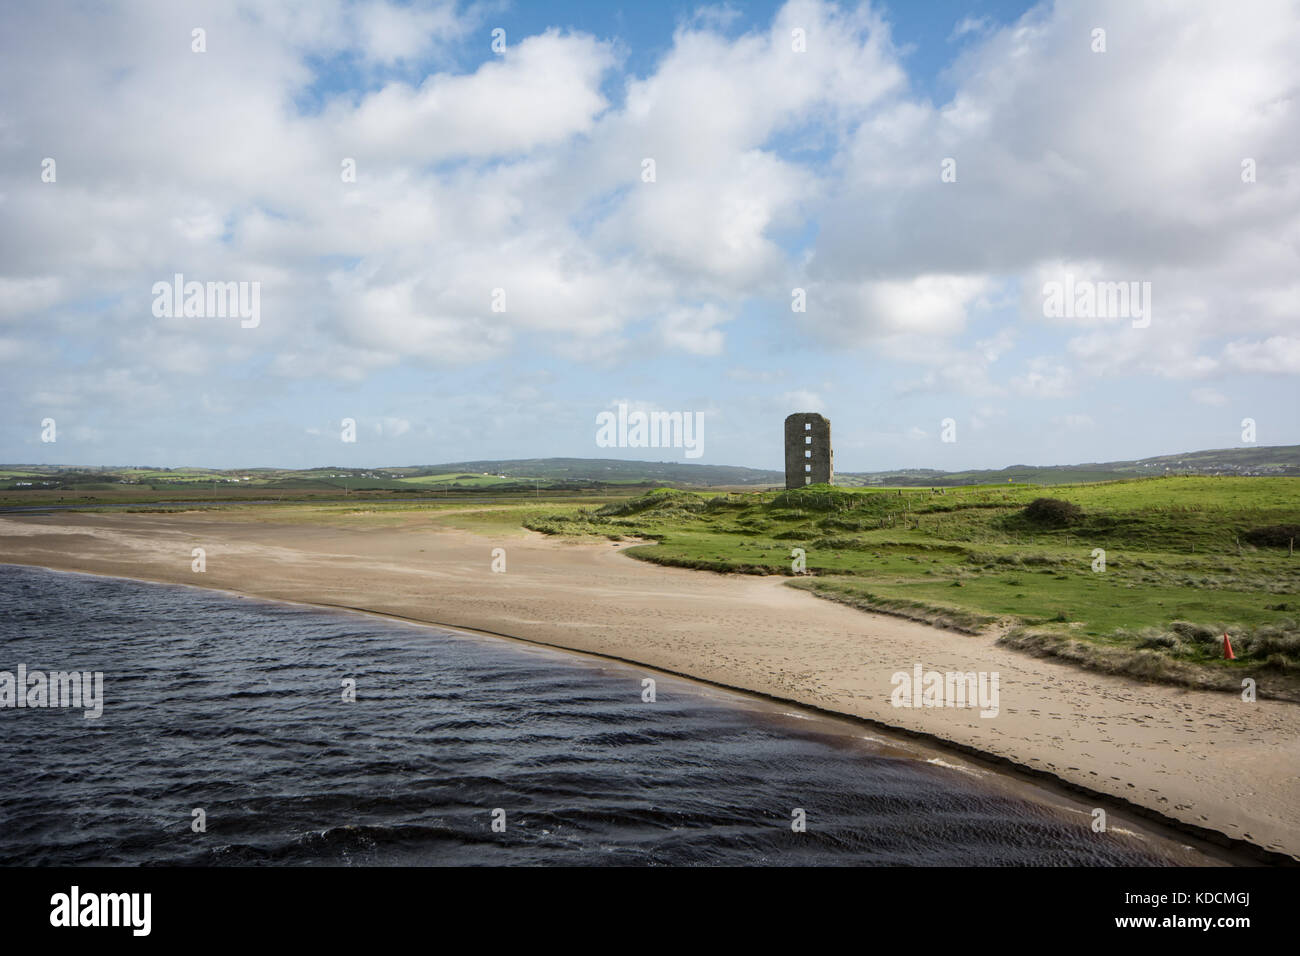 Landscape view of Dough Castle at the Castle Golf Course on the Inagh river estuary along the Wild Atlantic Way near Lahinch in county Clare, Ireland Stock Photo